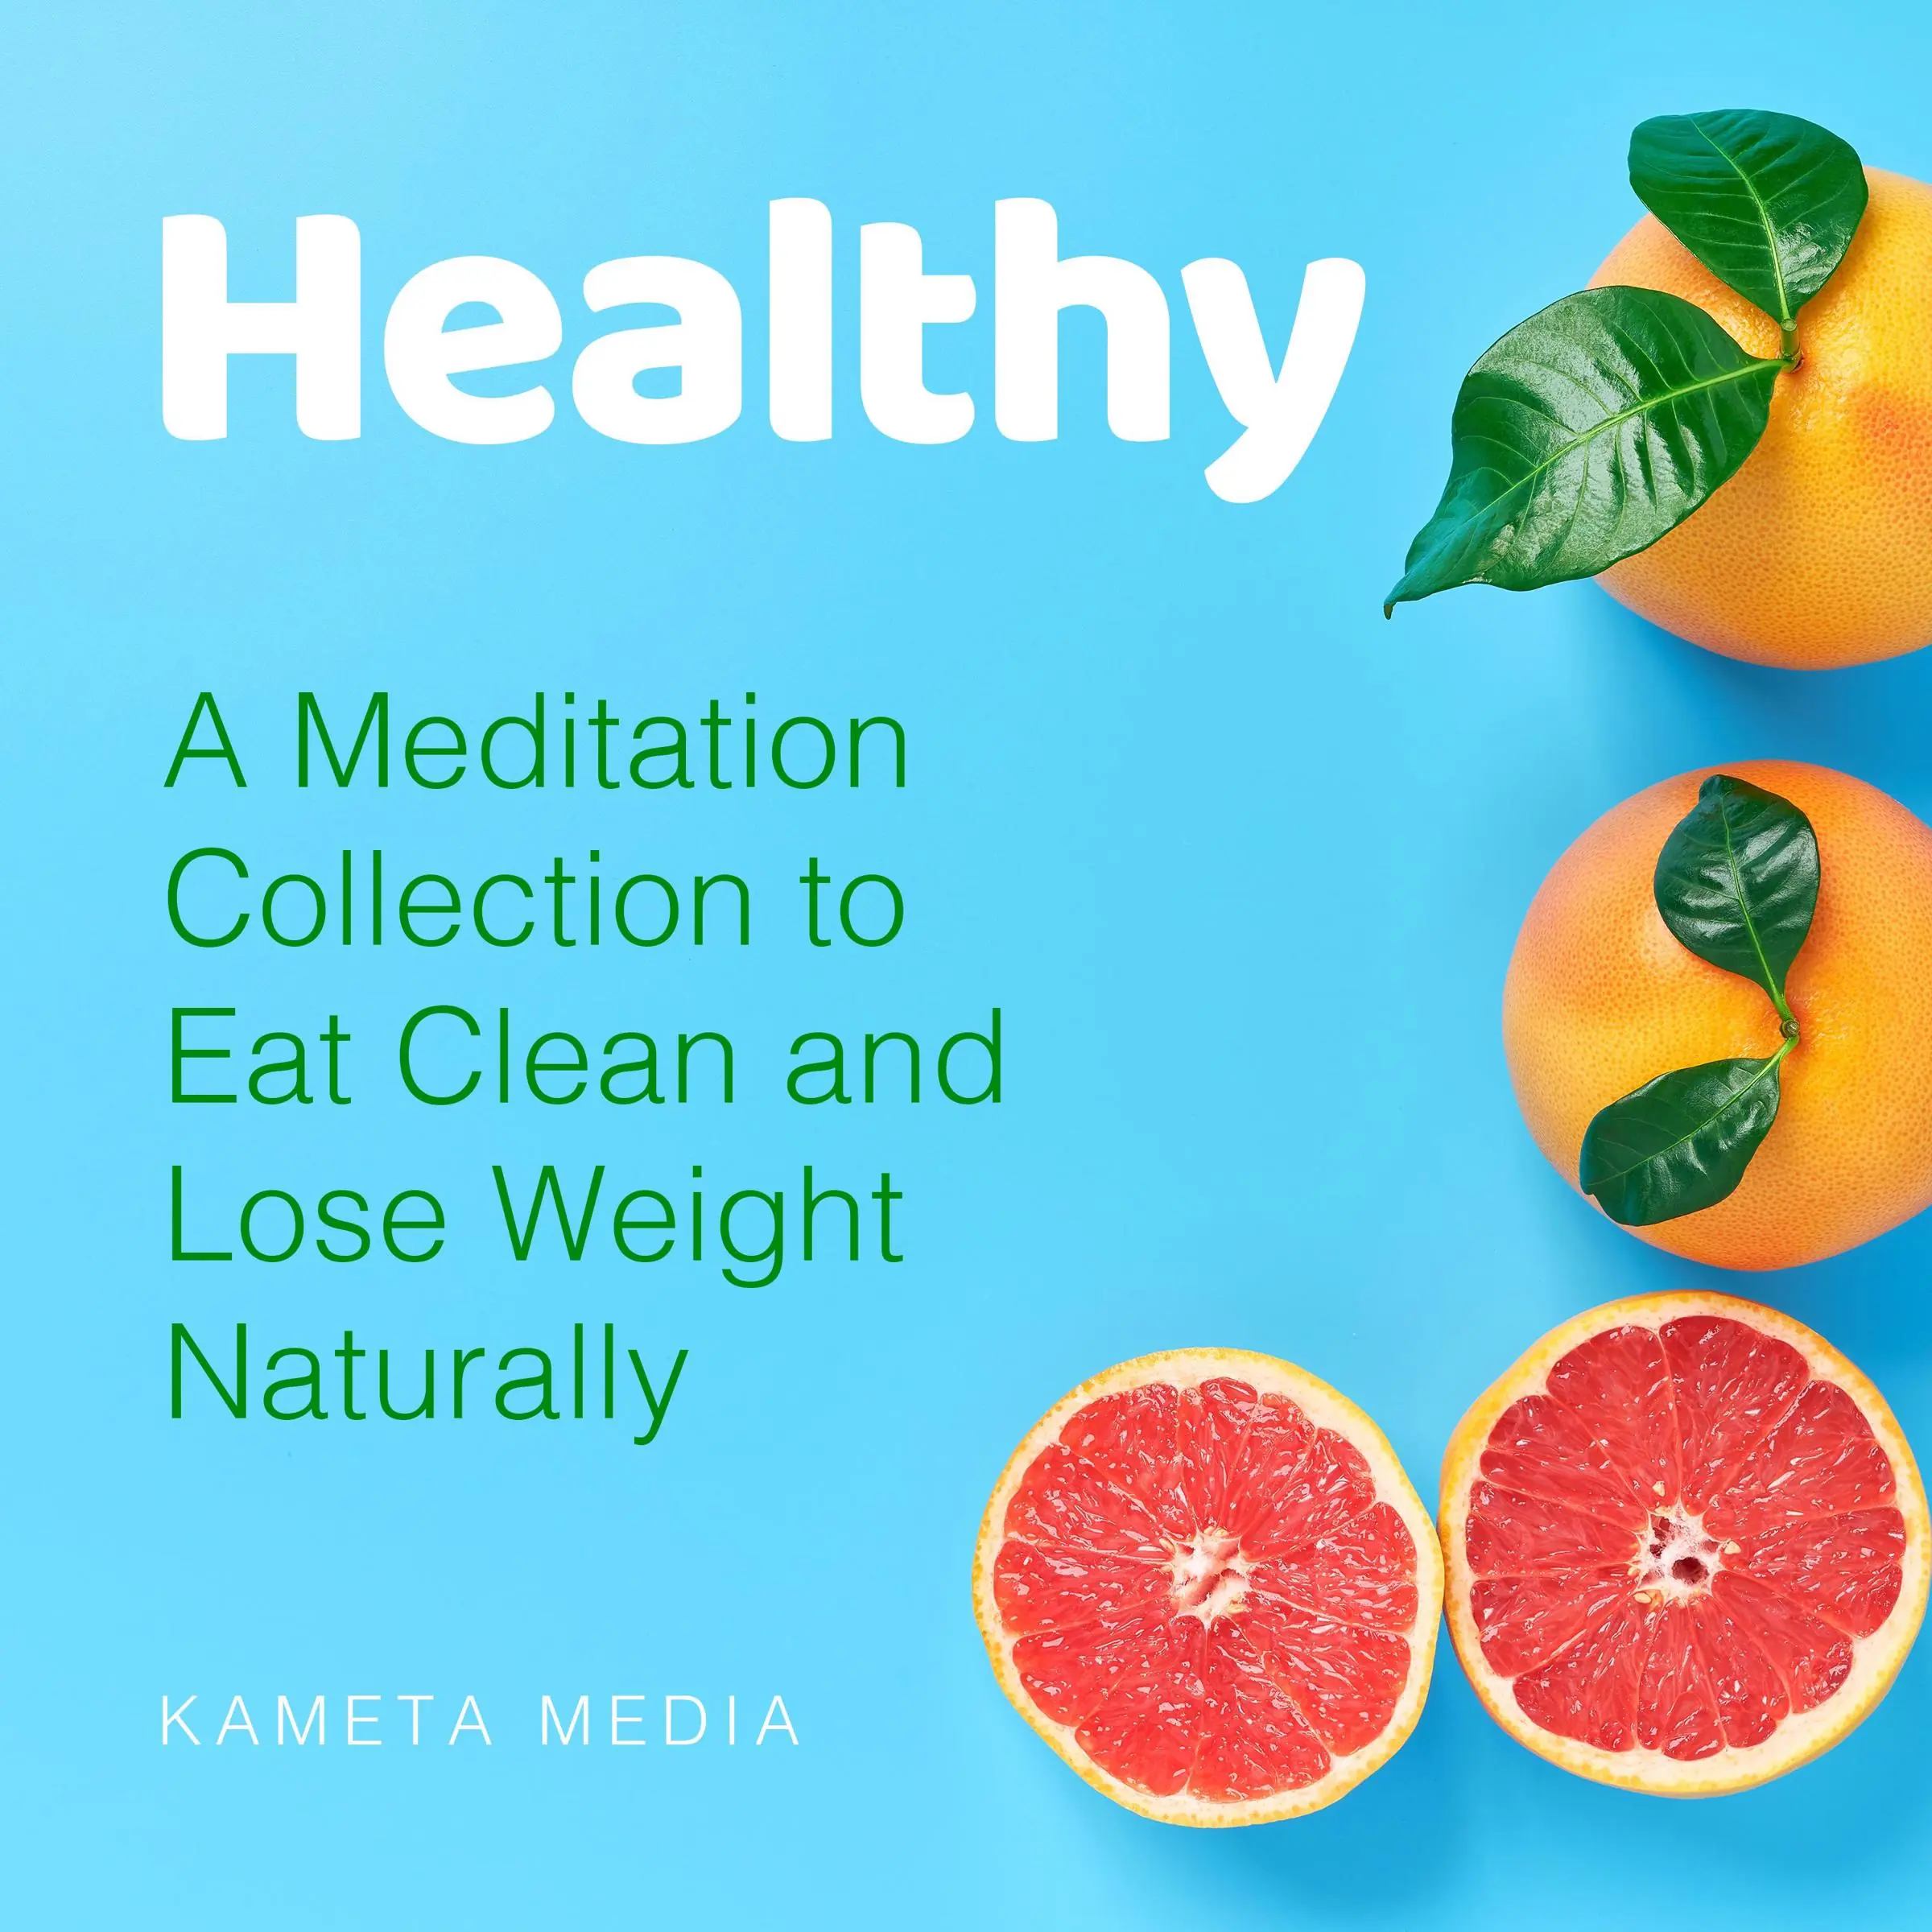 Healthy: A Meditation Collection to Eat Clean and Lose Weight Naturally Audiobook by Kameta Media